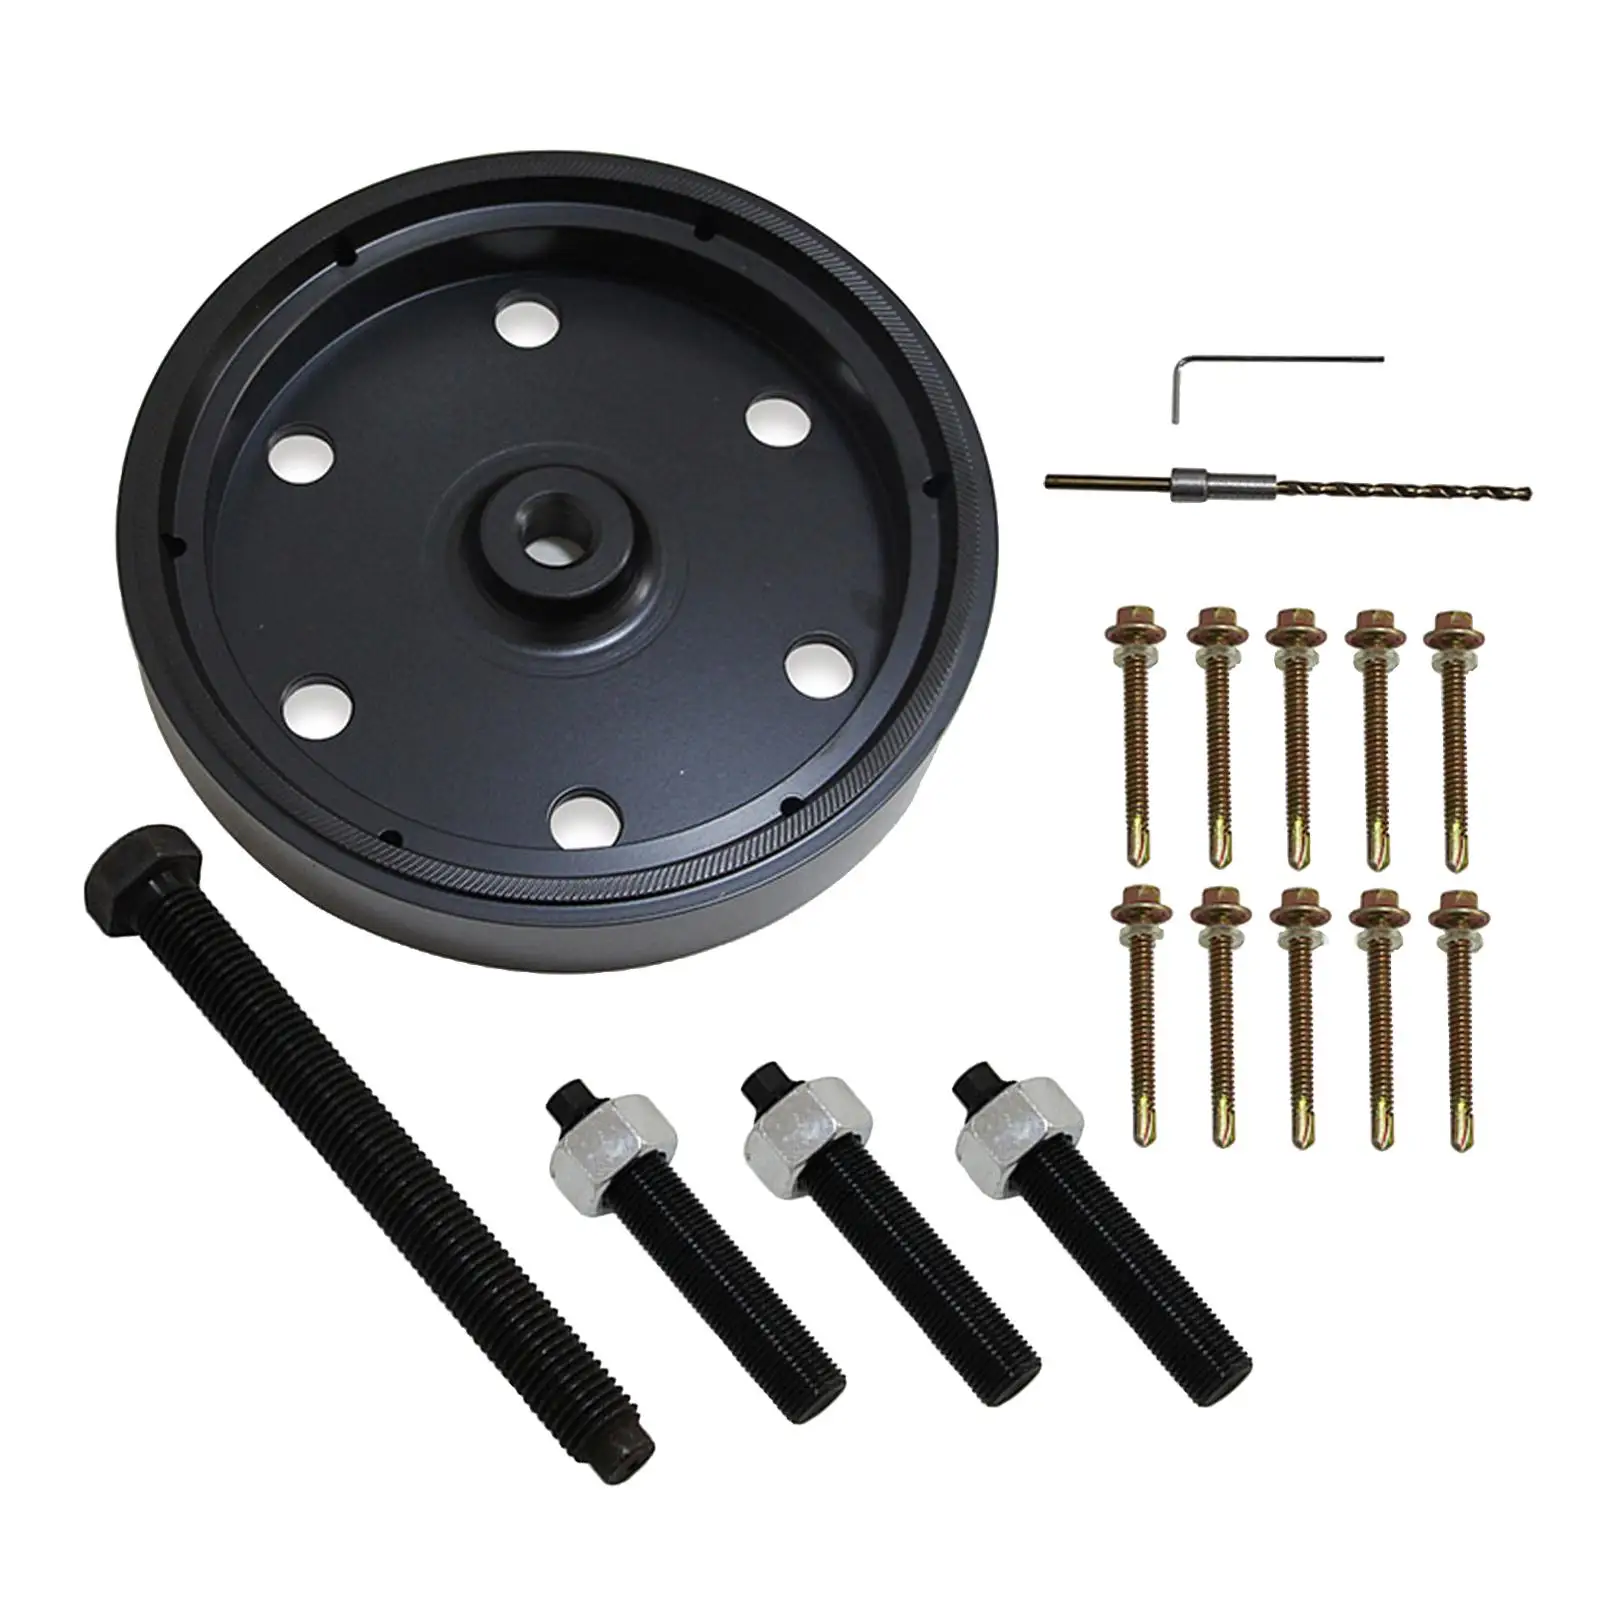 Sleeve Remover and Installer Tool Kit Equipment Replacement Easy Installation Spare 3164780 Crankshaft Rear for Cummins Isx